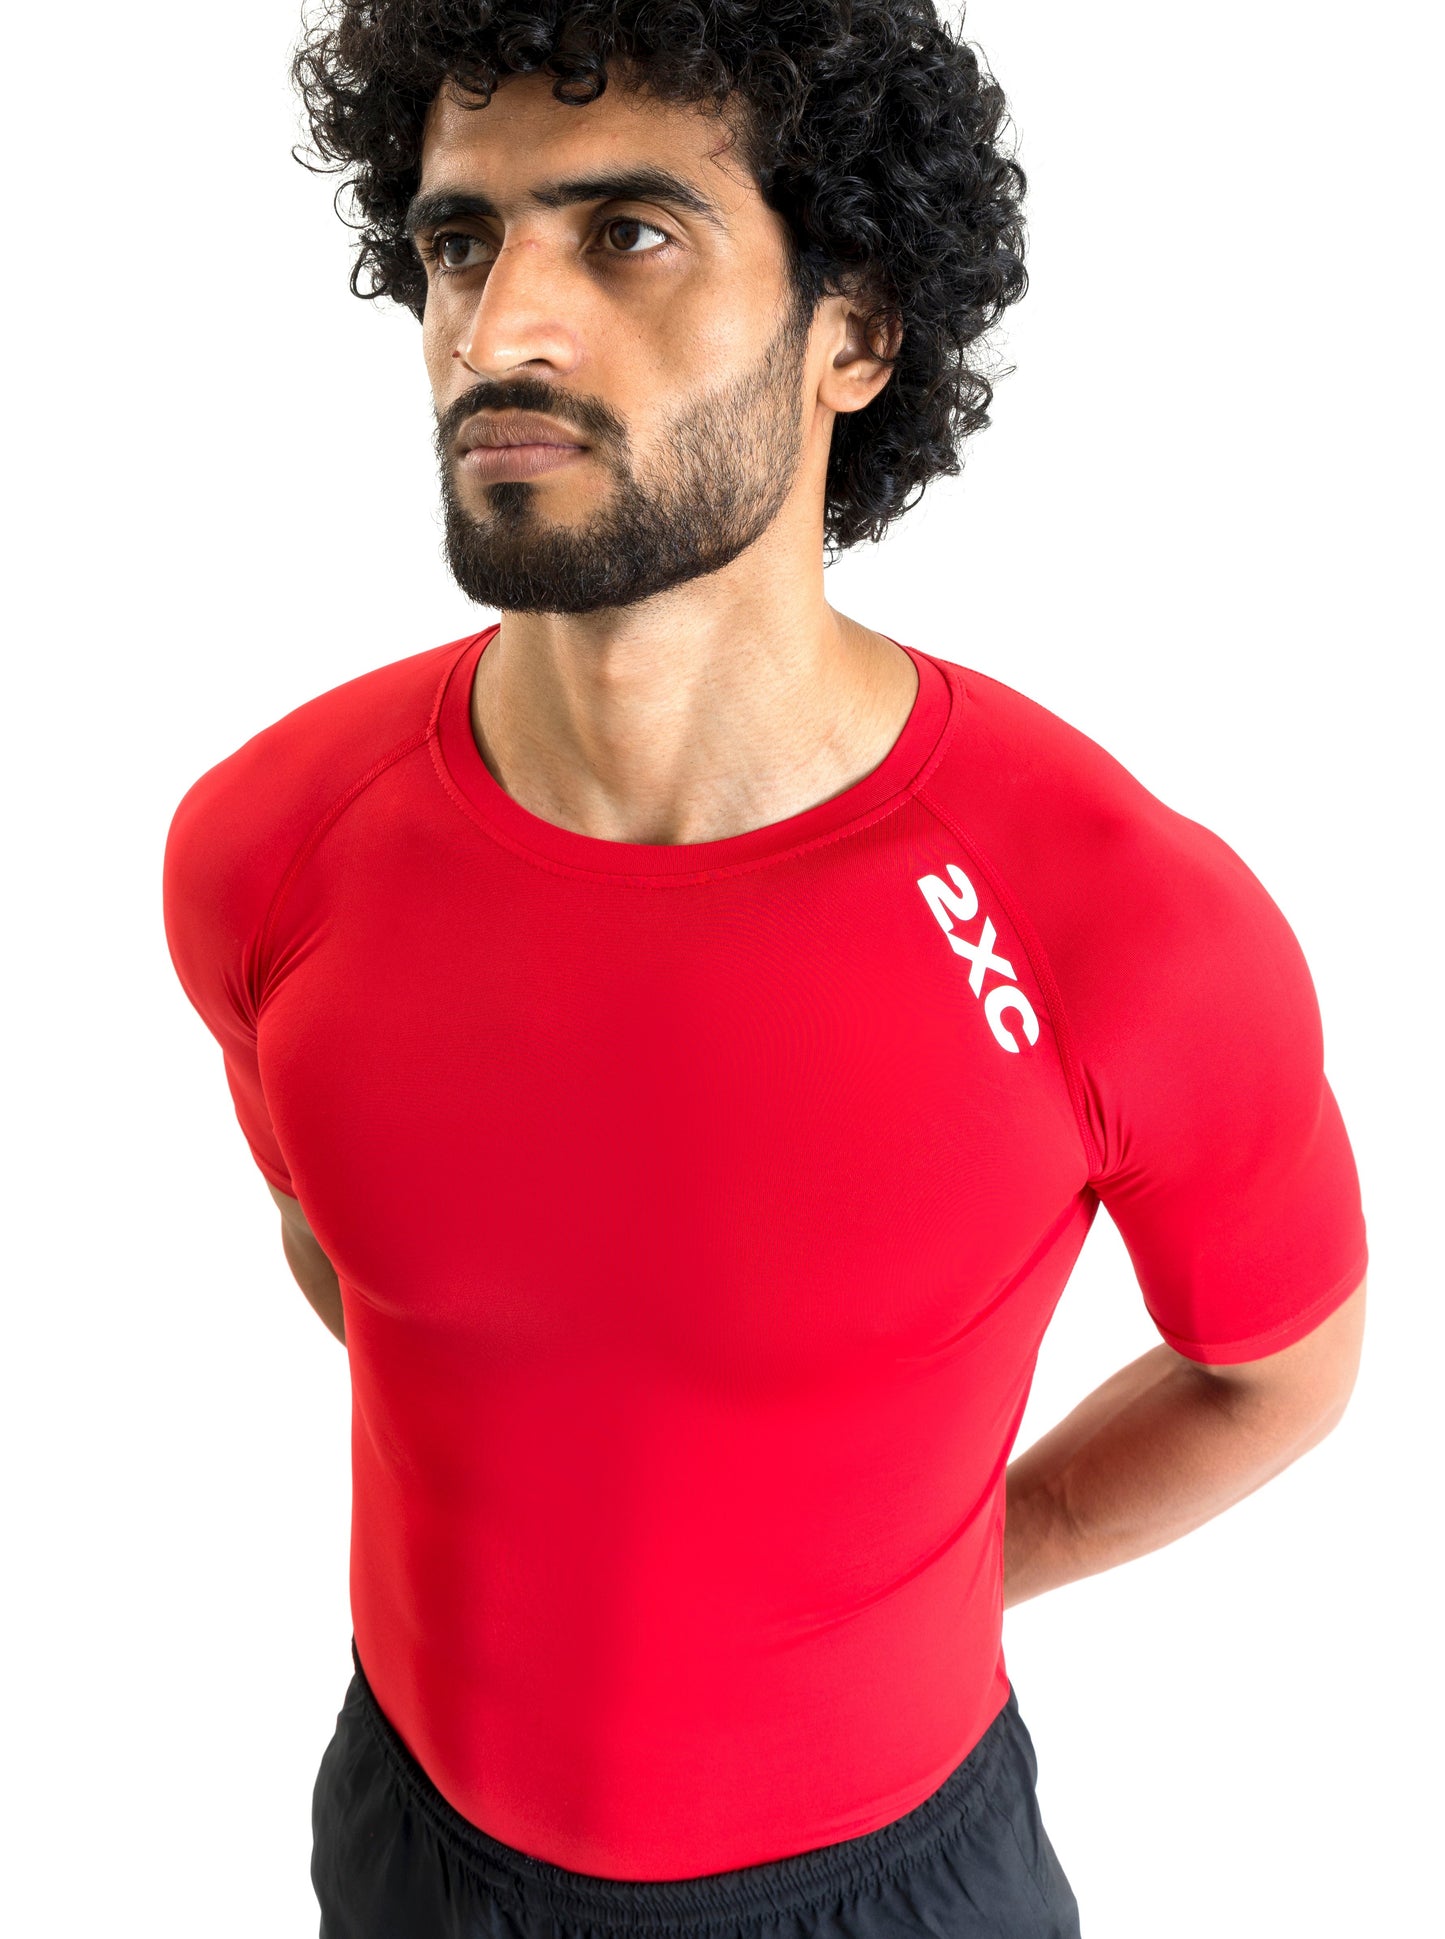 RED HALF SLEEVE RUNNING/WORKOUT COMPRESSION